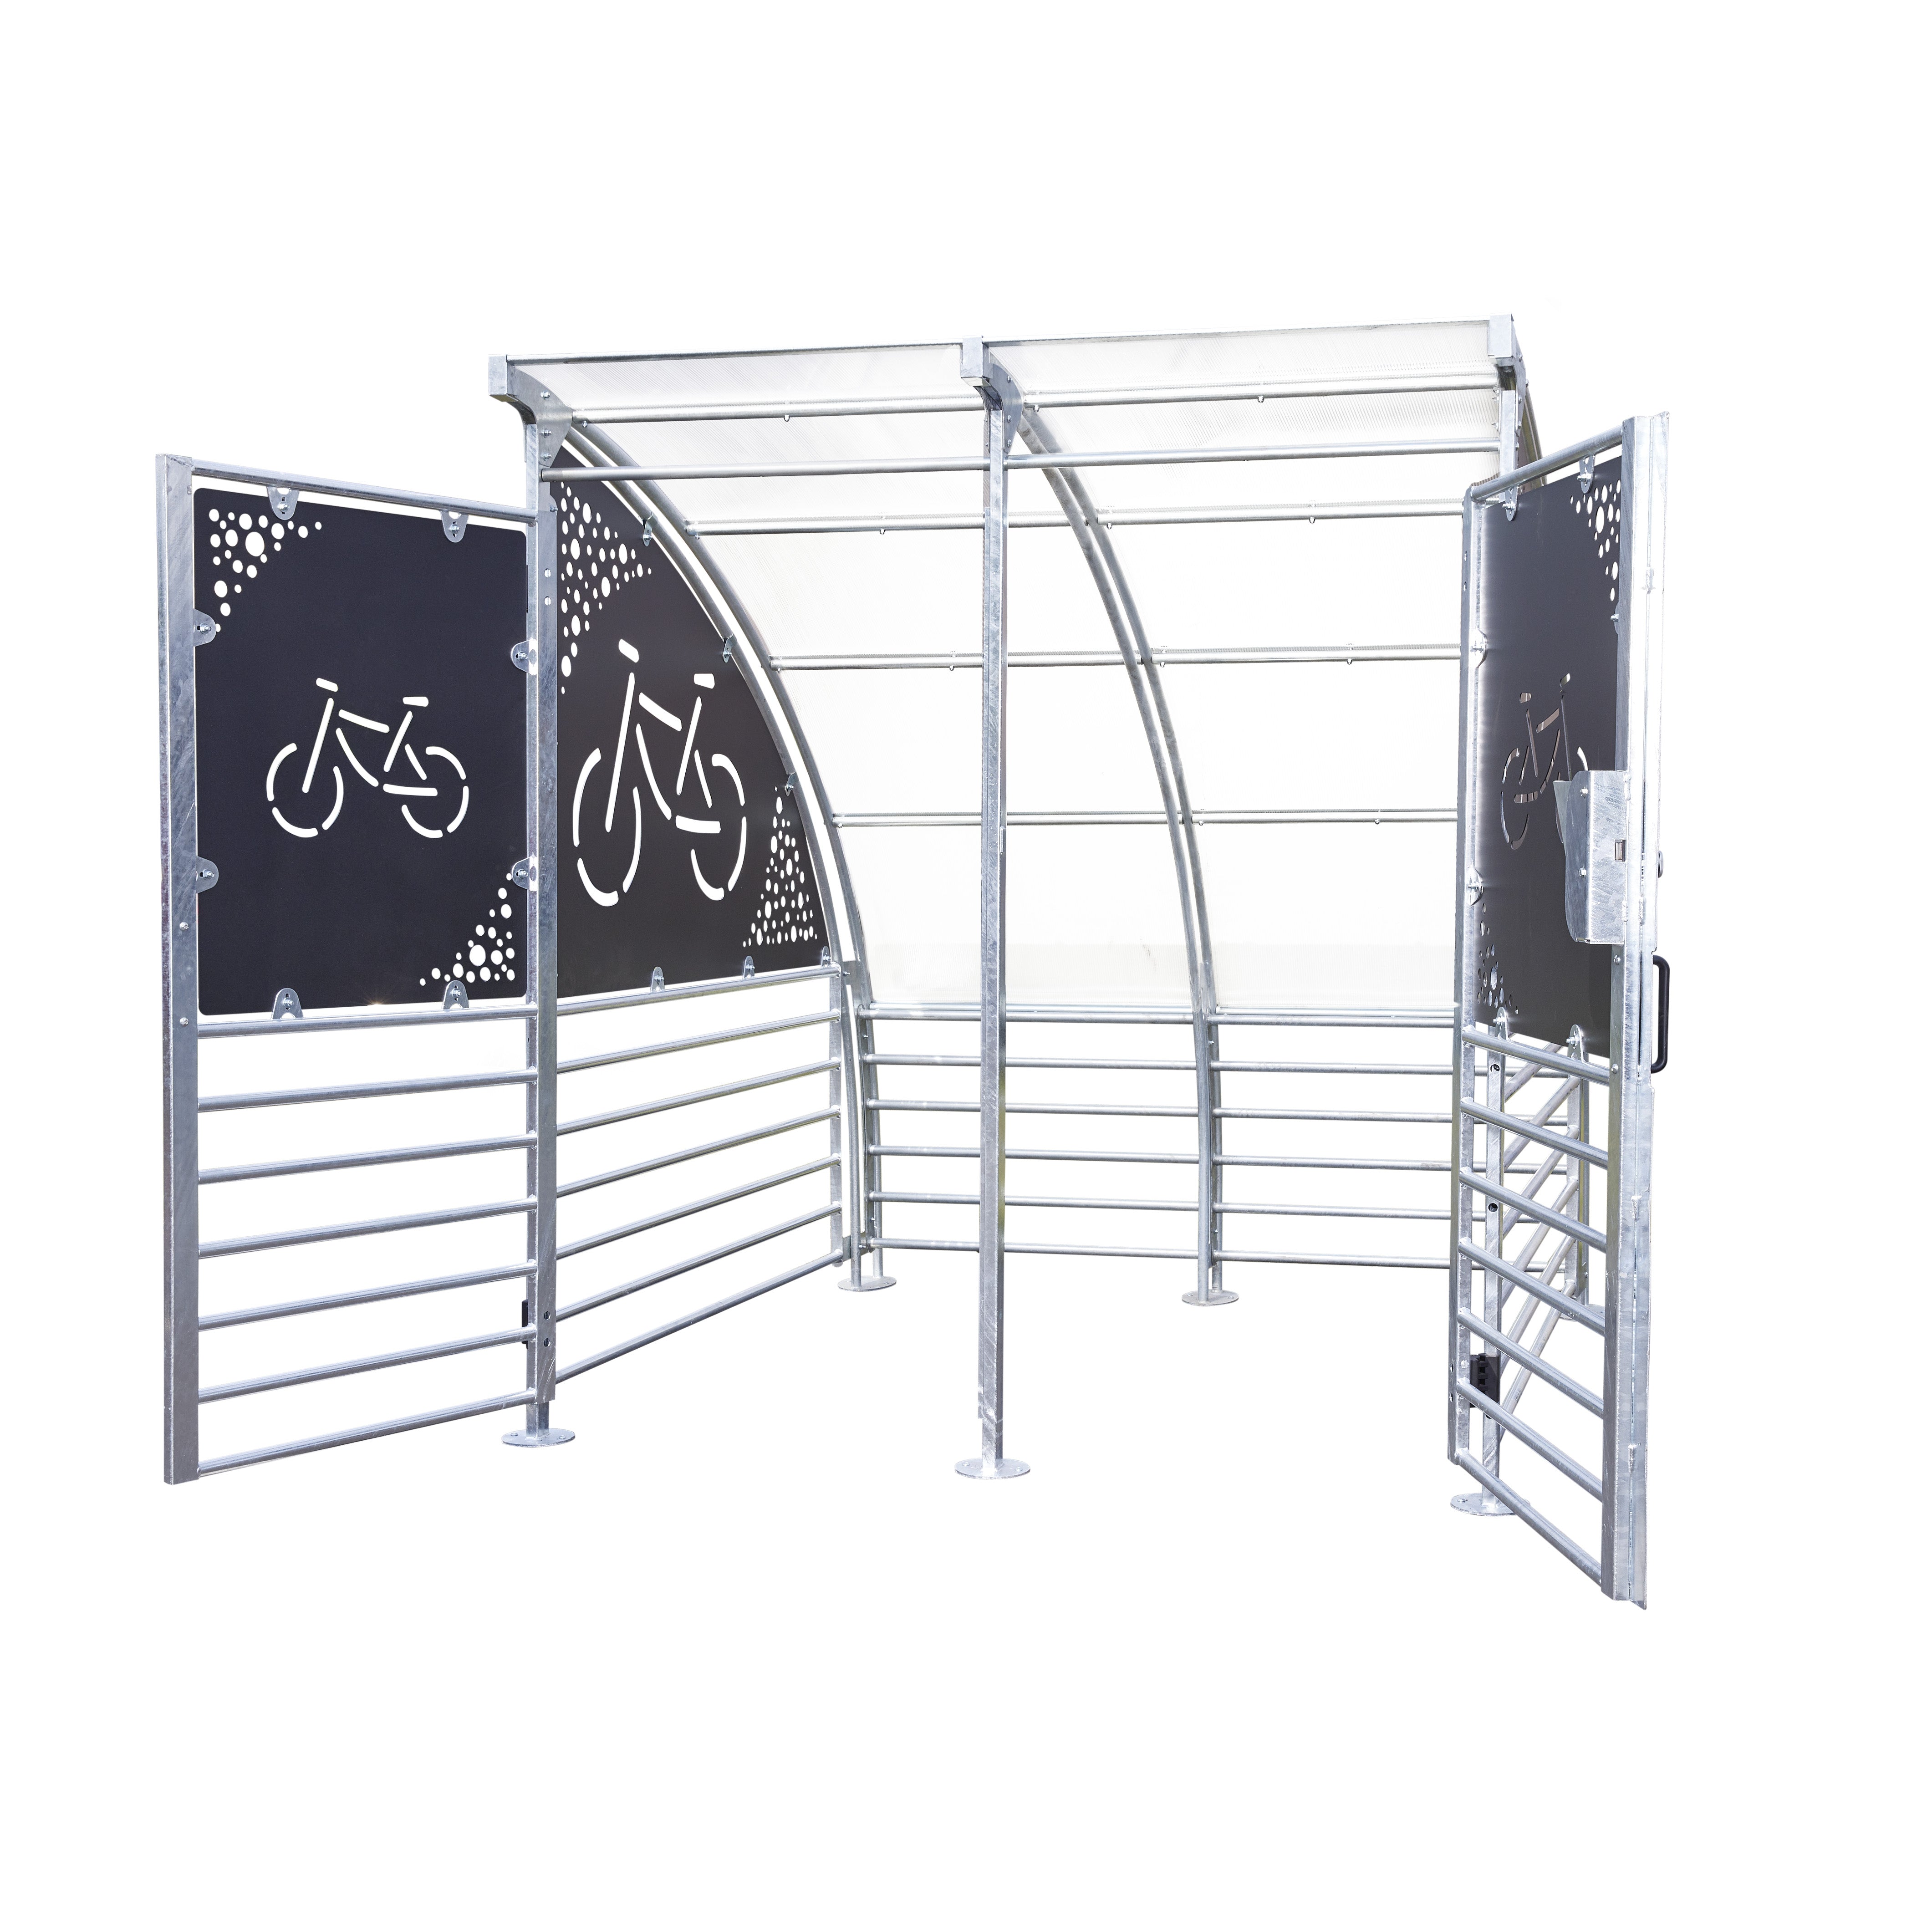 Calais Compact Secure Cycle Shelter